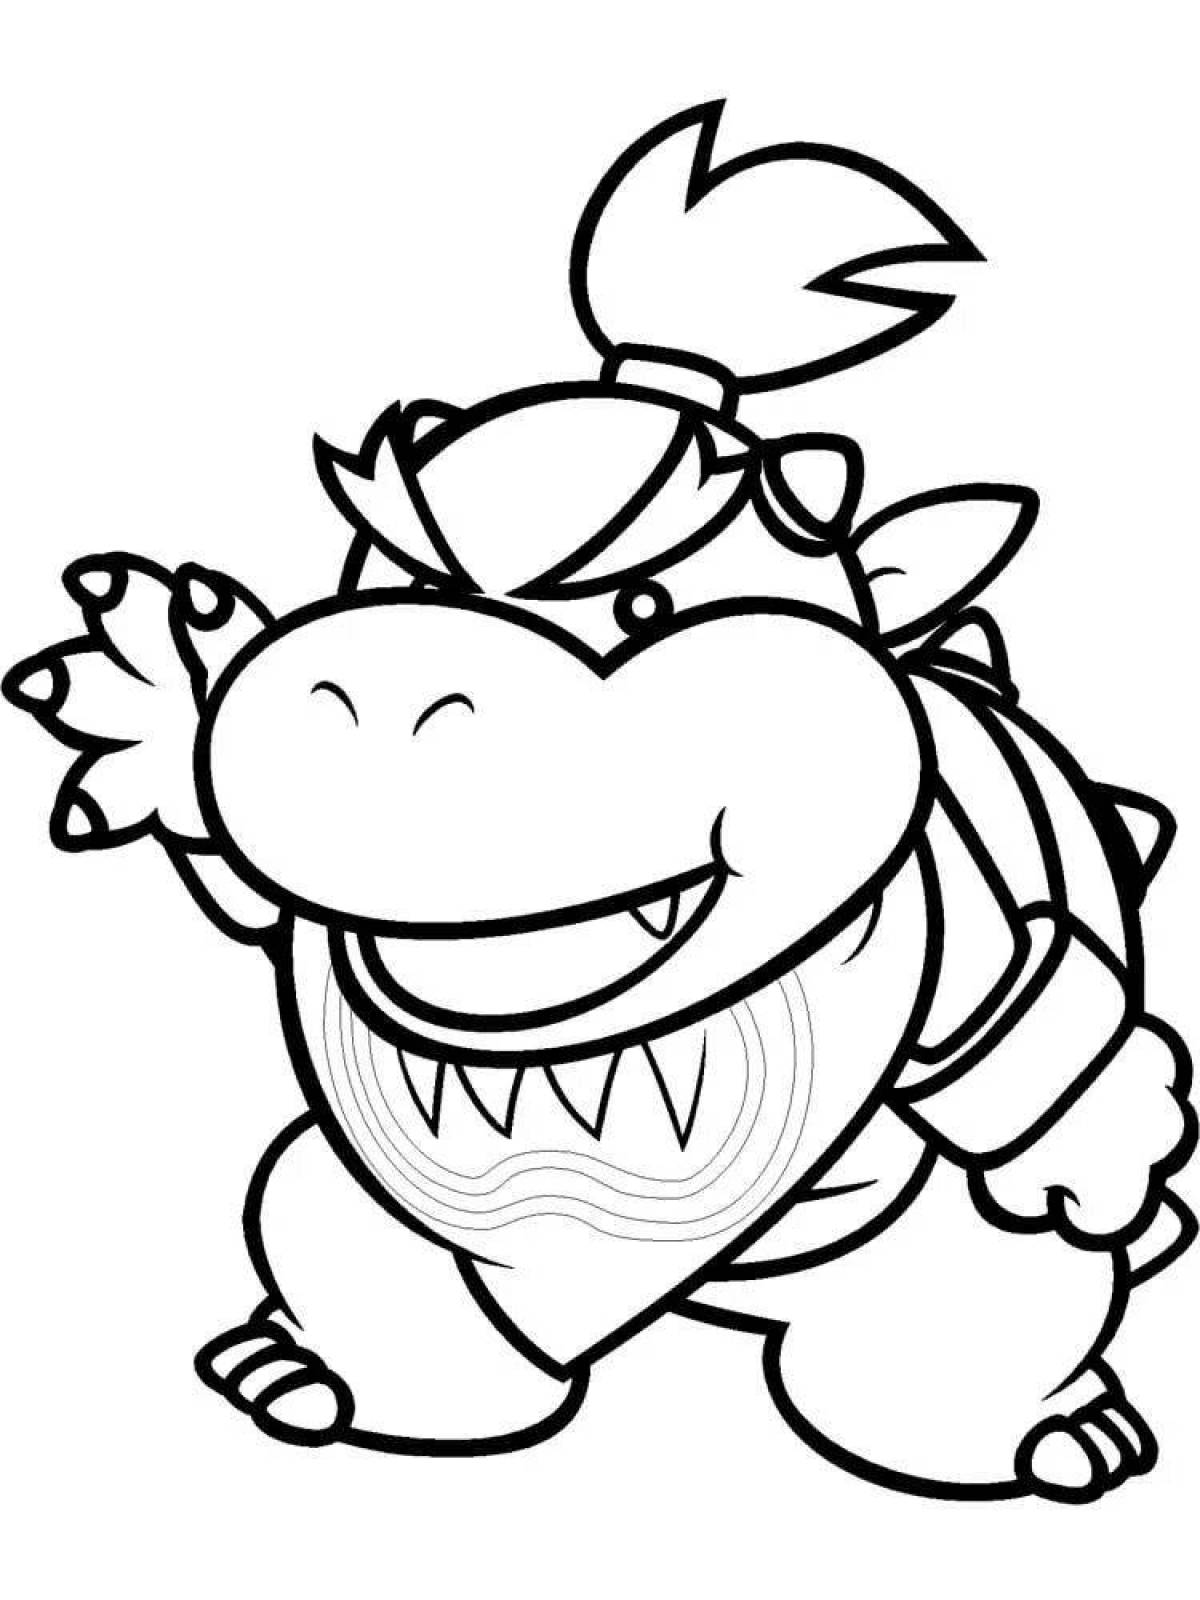 Great bowser coloring book